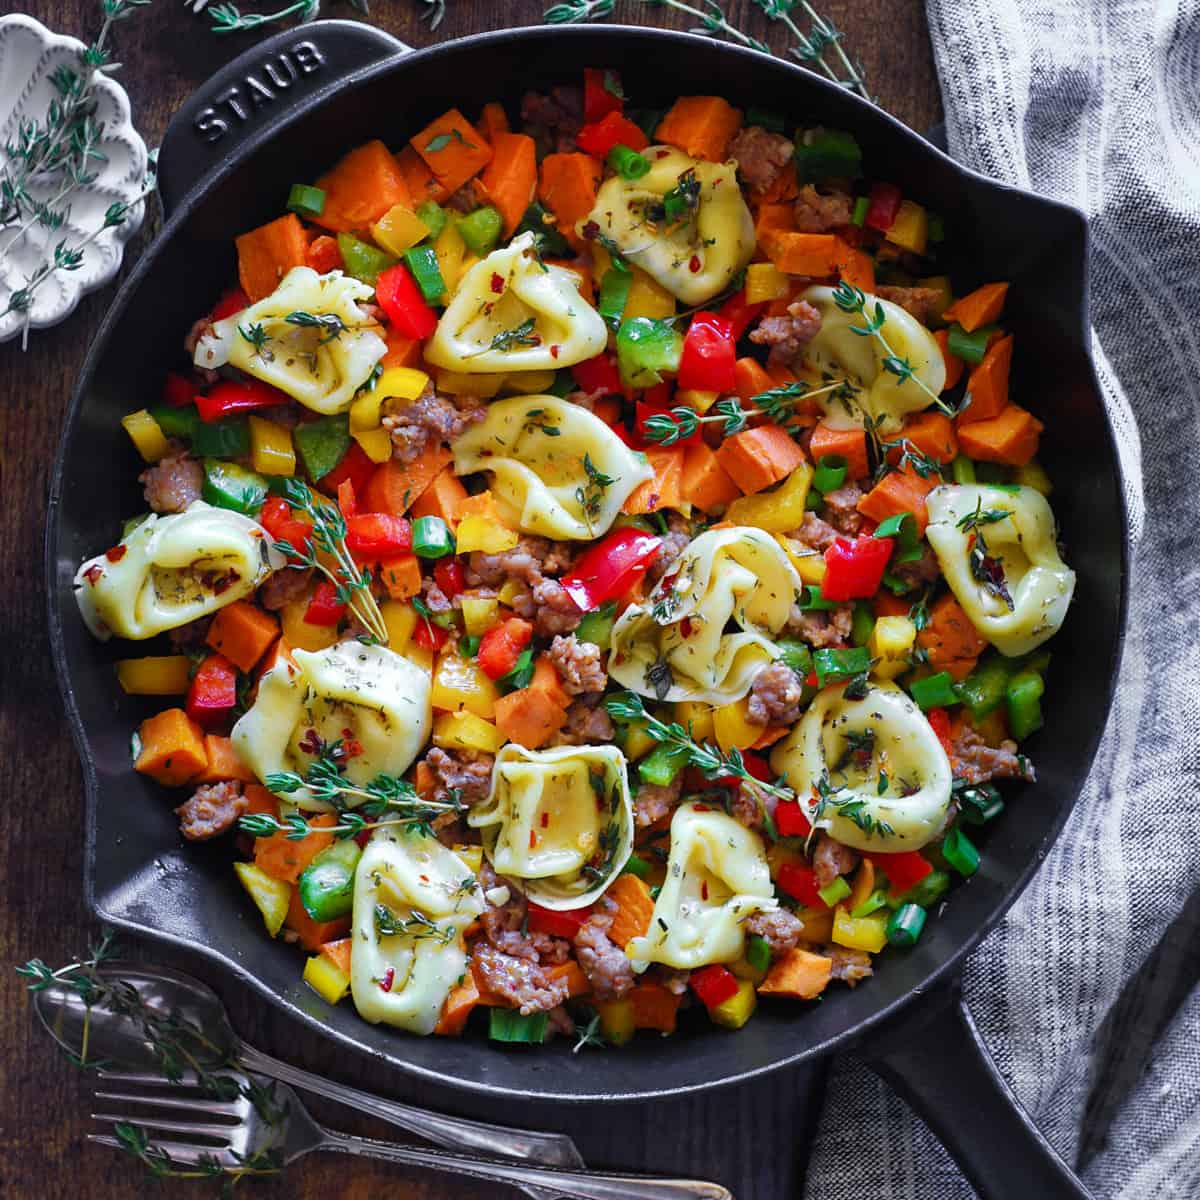 Sweet Potato Skillet with Tortellini, Sausage, and Bell Peppers.